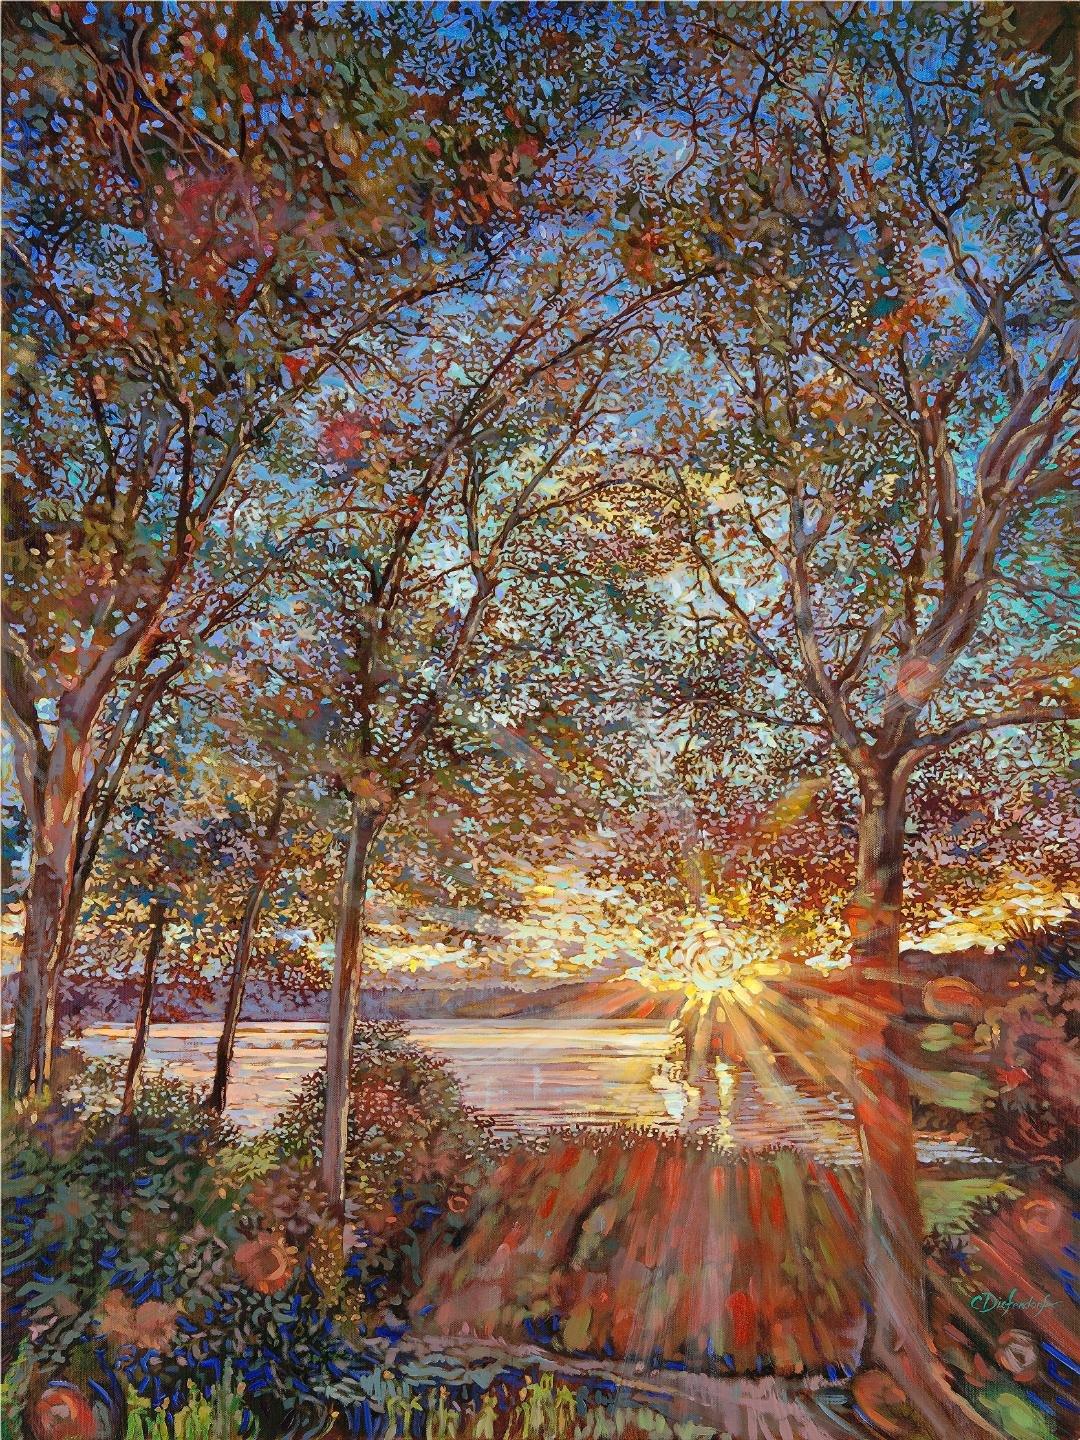 This piece, "Golden Hour" is a 40x30 oil painting on canvas by artist Cathy Diefendorf. Featured is a view through the green trees dappled with warm sunlight from the blue sky above. Shimmering lake water can be seen through the branches, reflecting